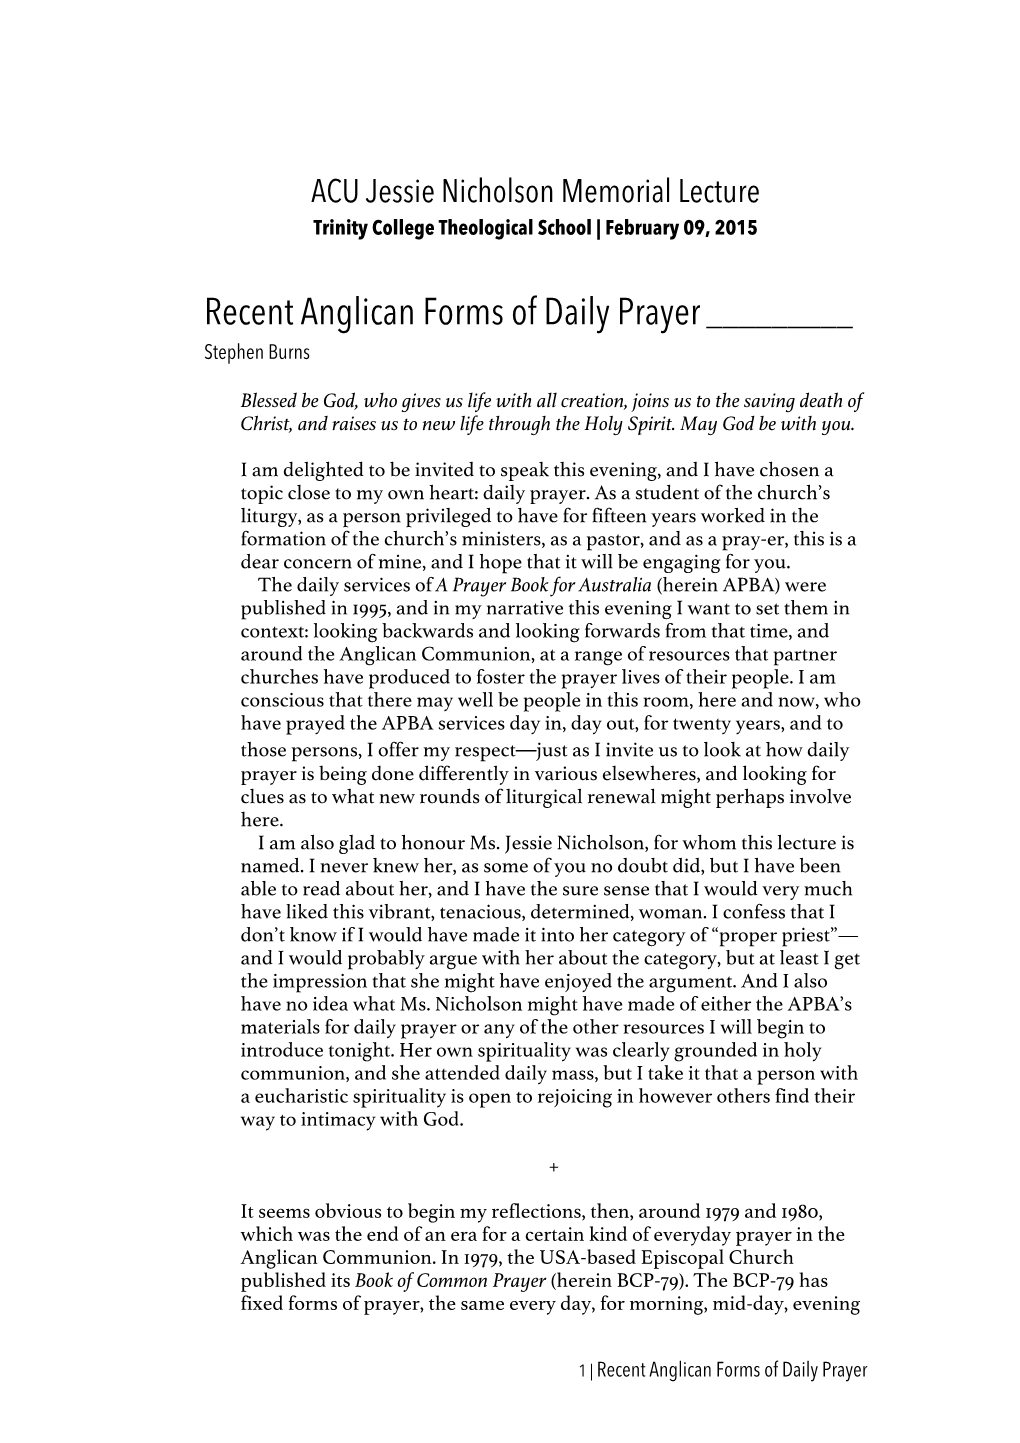 Recent Anglican Forms of Daily Prayer ______Stephen Burns